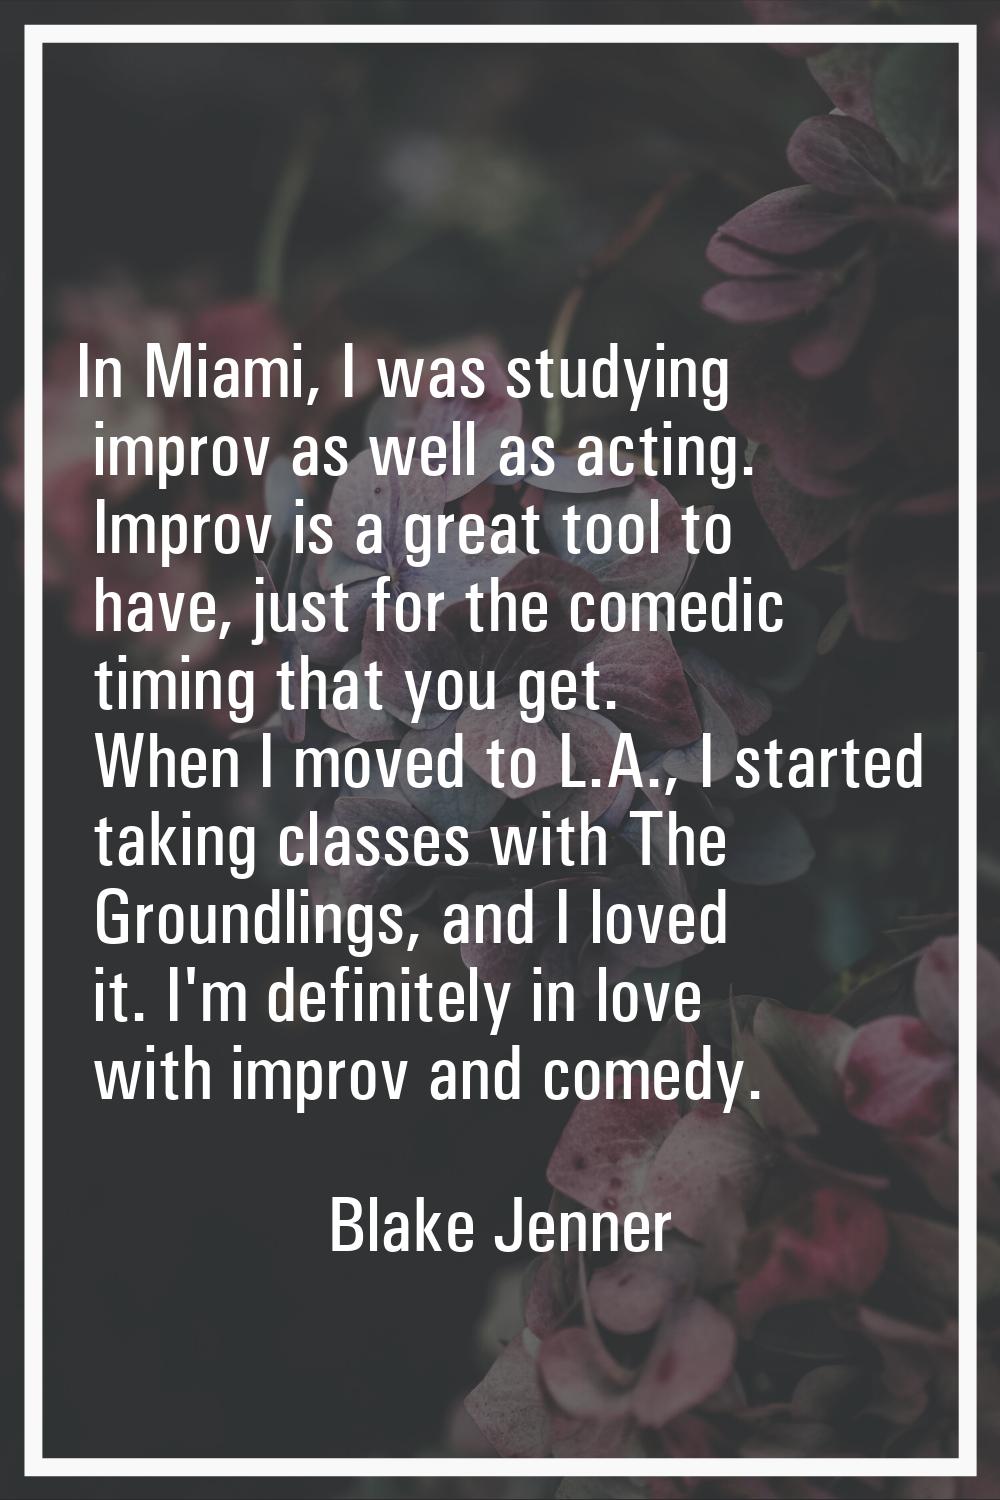 In Miami, I was studying improv as well as acting. Improv is a great tool to have, just for the com